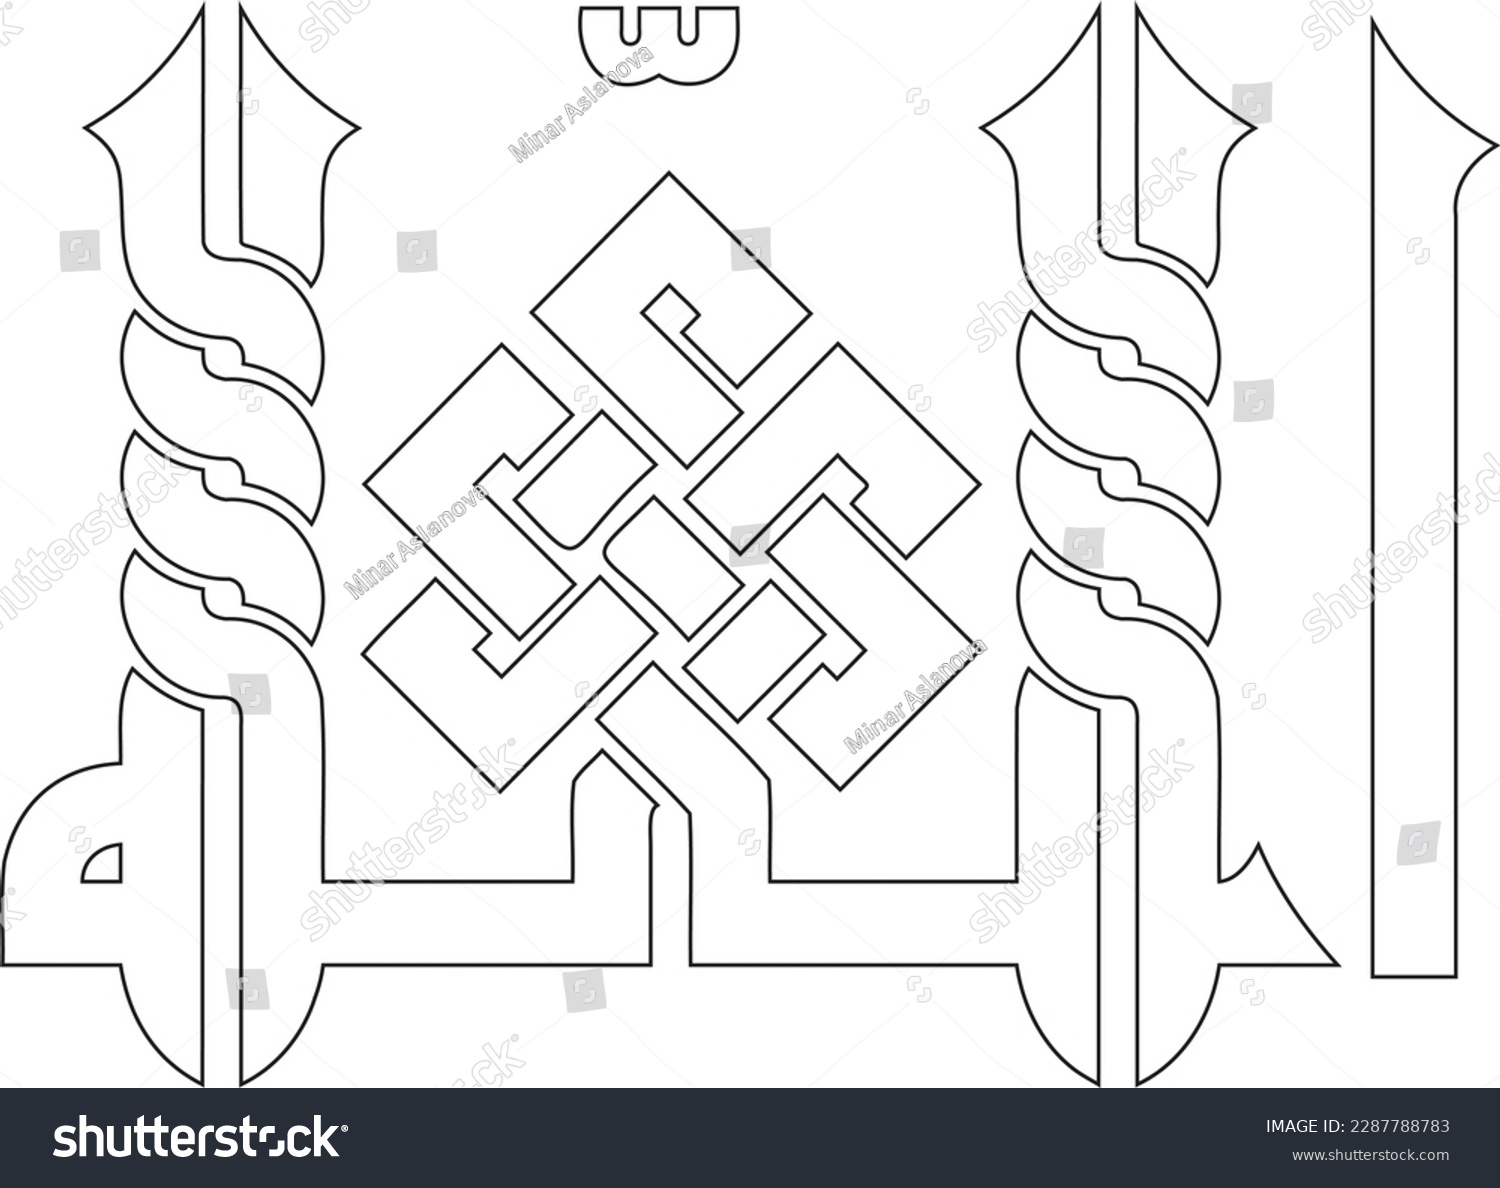 SVG of Allah calligraphy. Arabic calligraphy vector in kufi style. Islamic calligraphy art svg